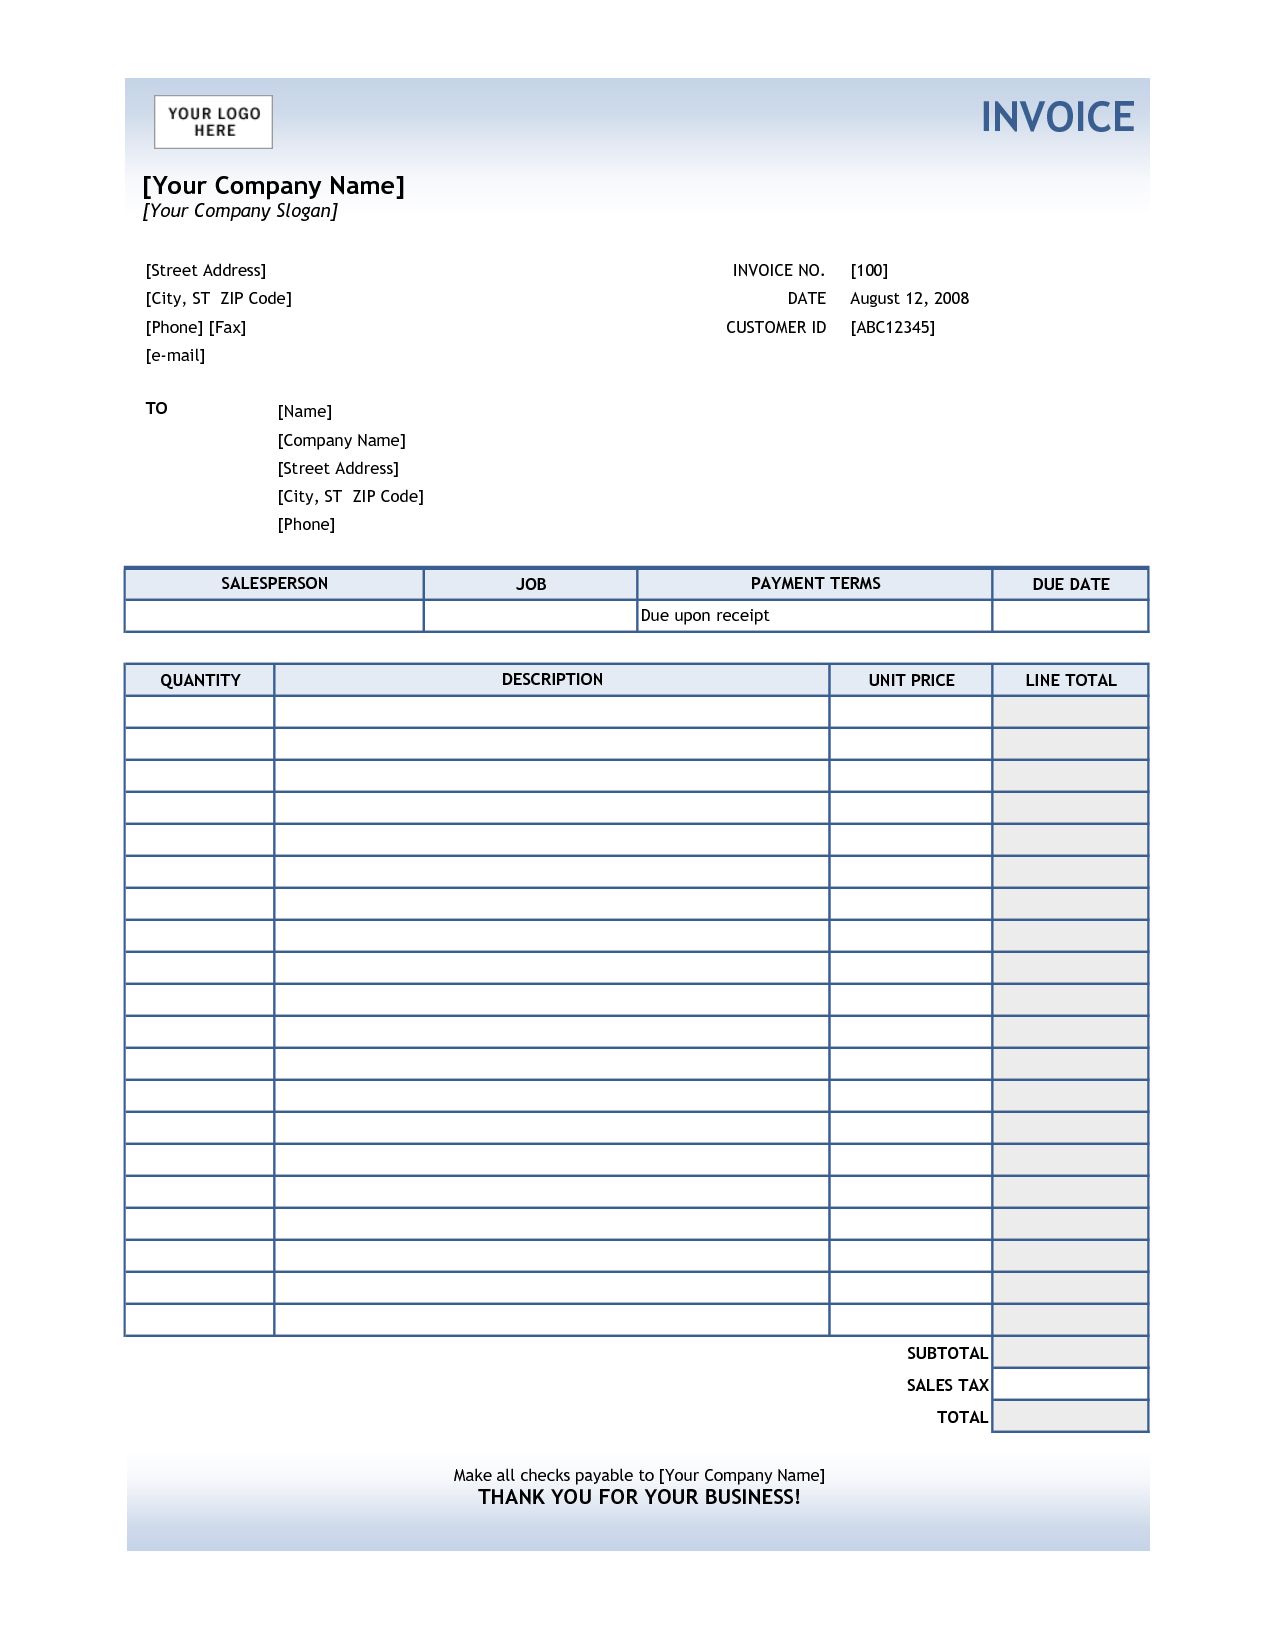 microsoft excel free invoice template